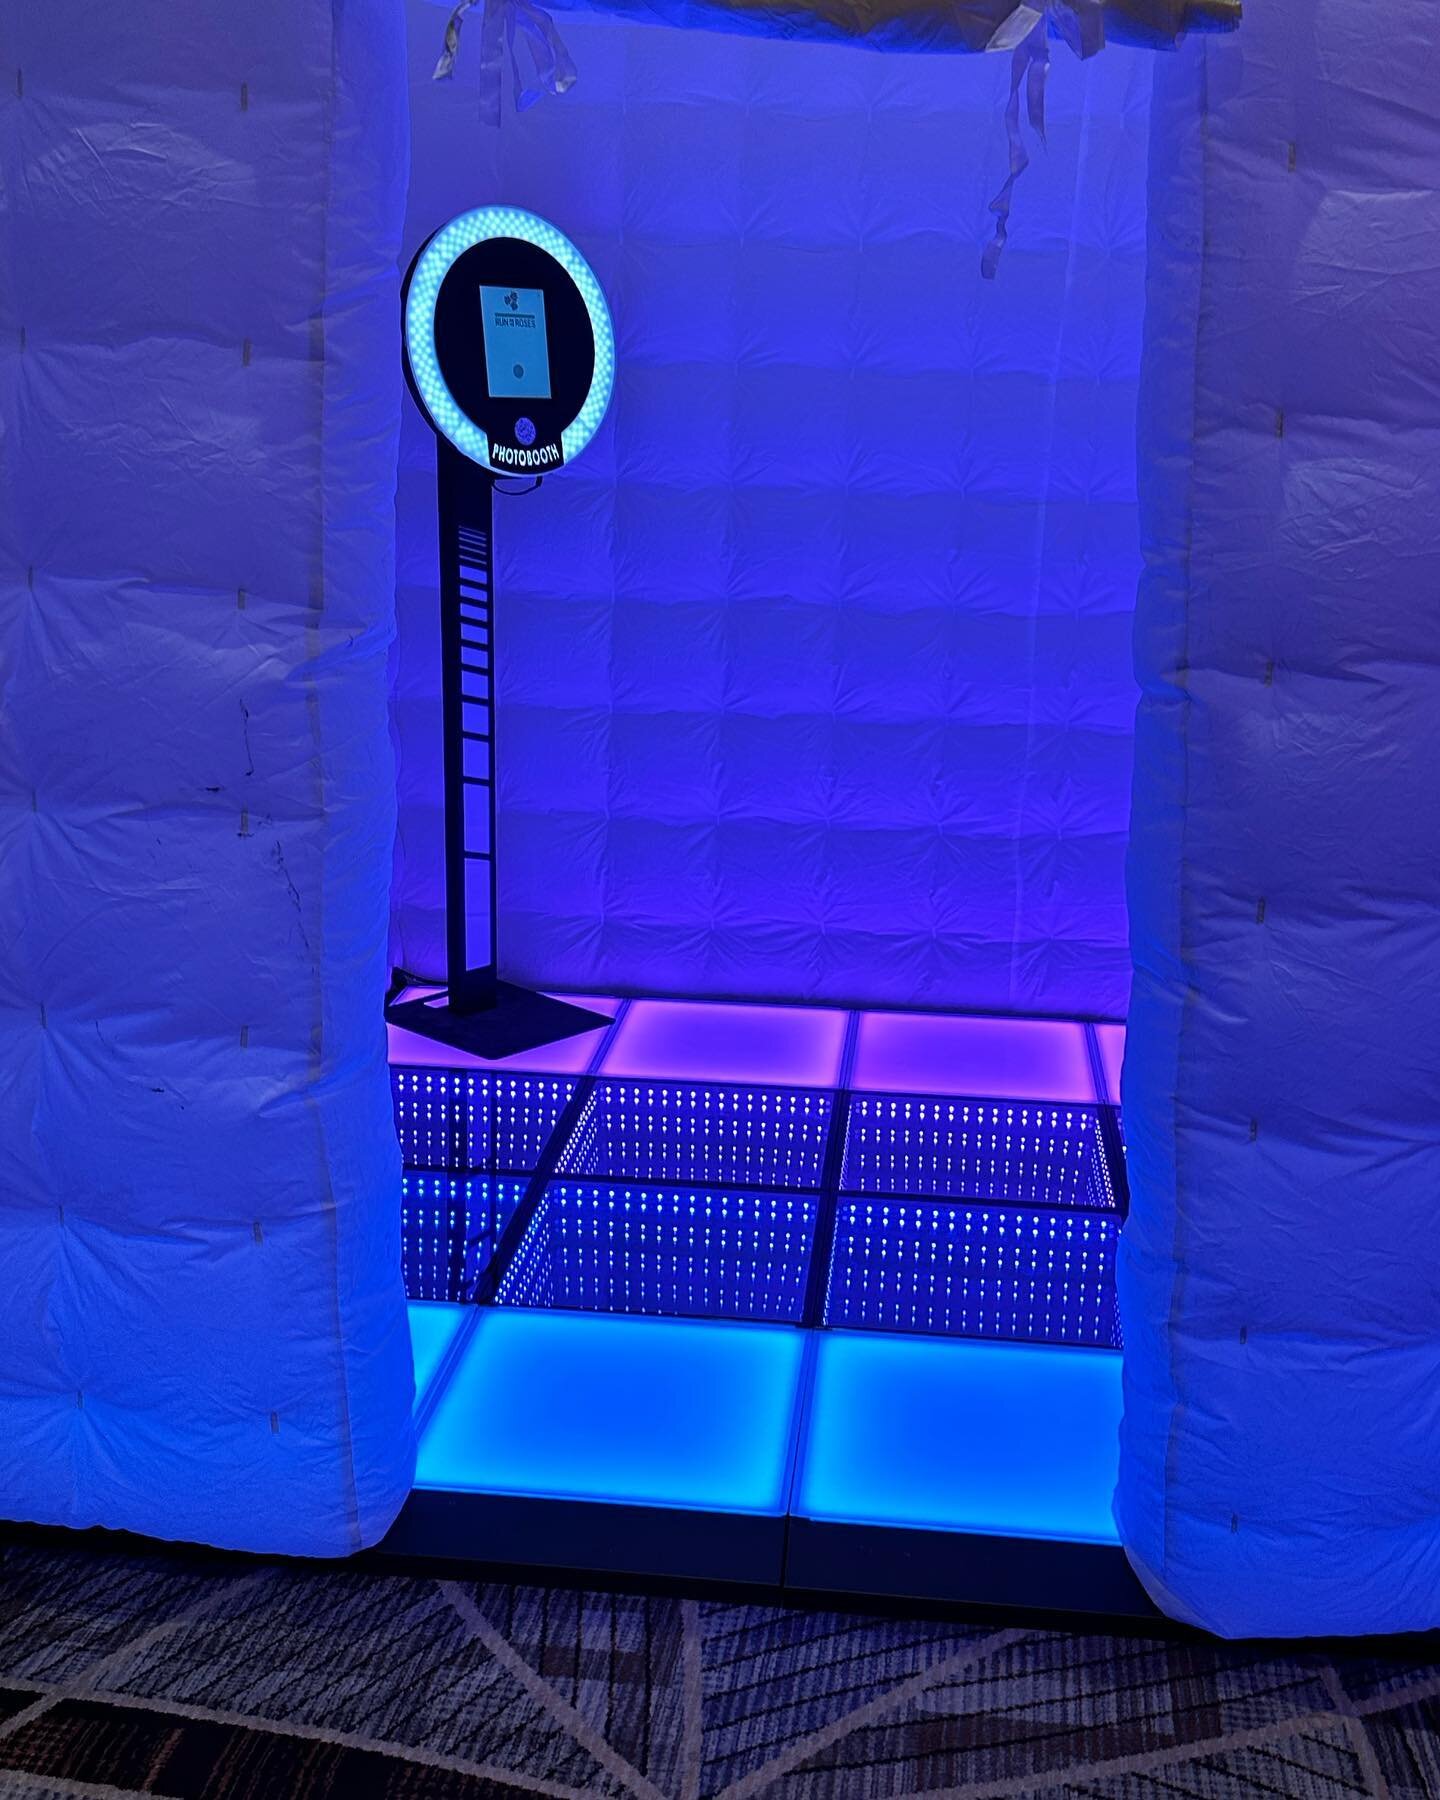 #photobooth with led floor. #wow